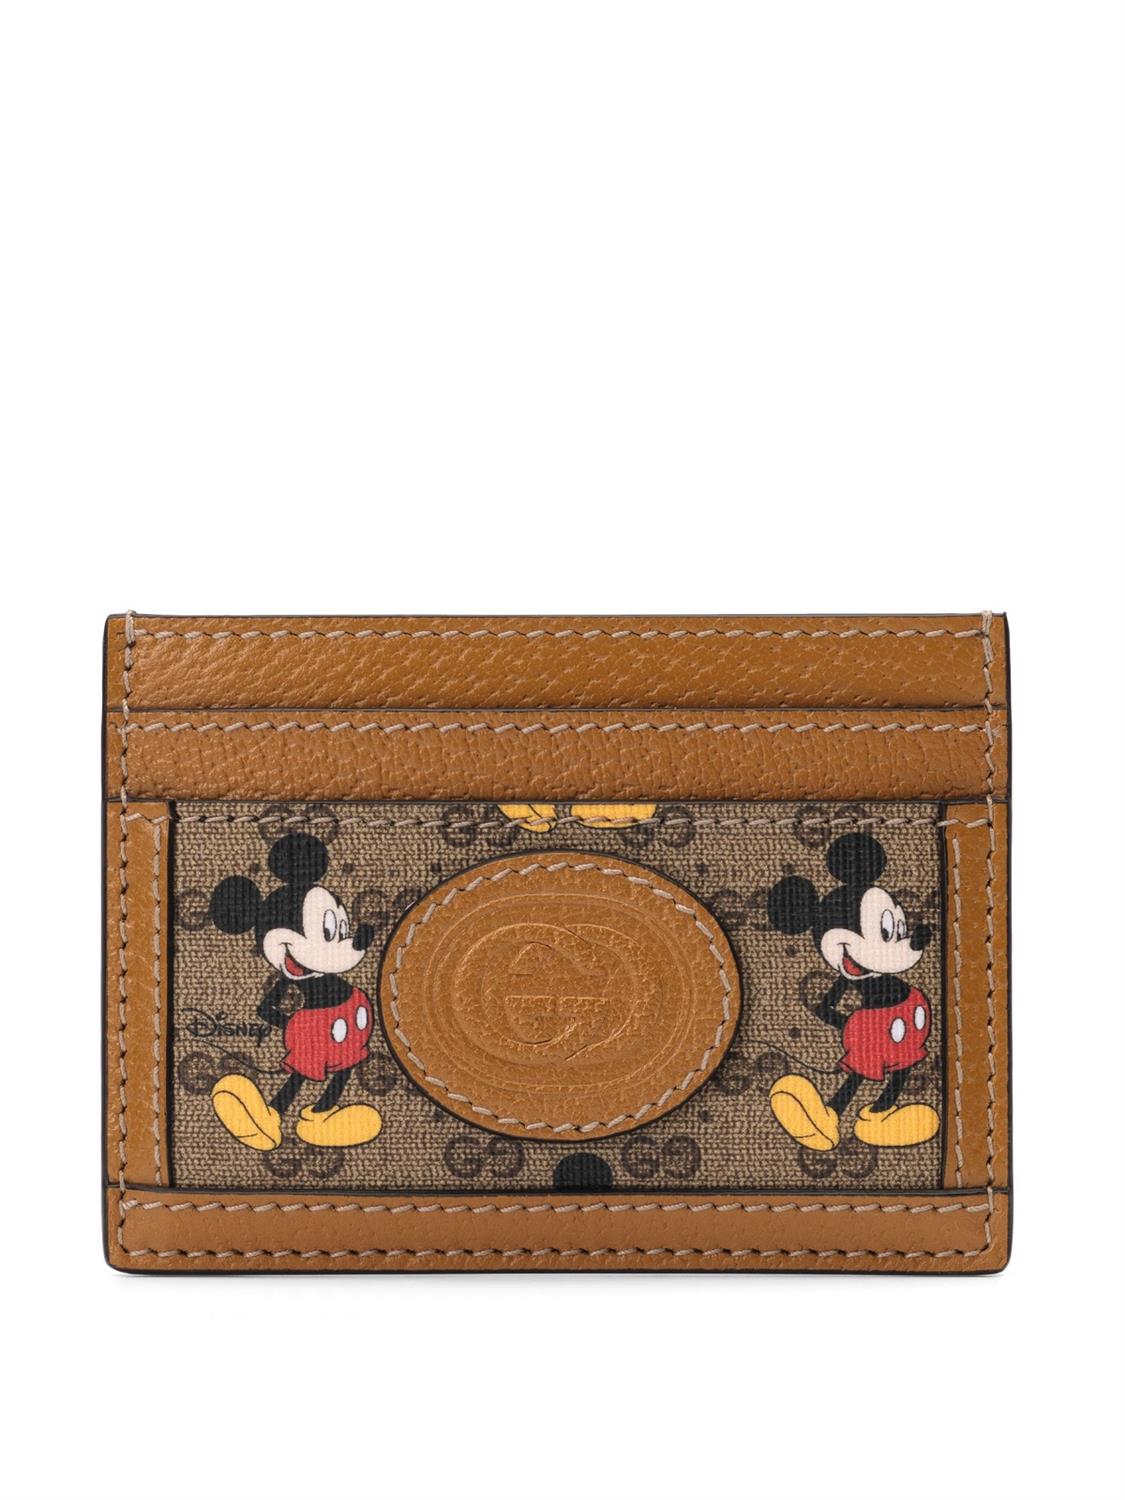 gucci on X: Luggage and accessories from the #DisneyXGucci collection to  celebrate the Year of the Mouse, crafted in GG motif printed with Mickey  Mouse and trimmed in leather. ©Disney  /